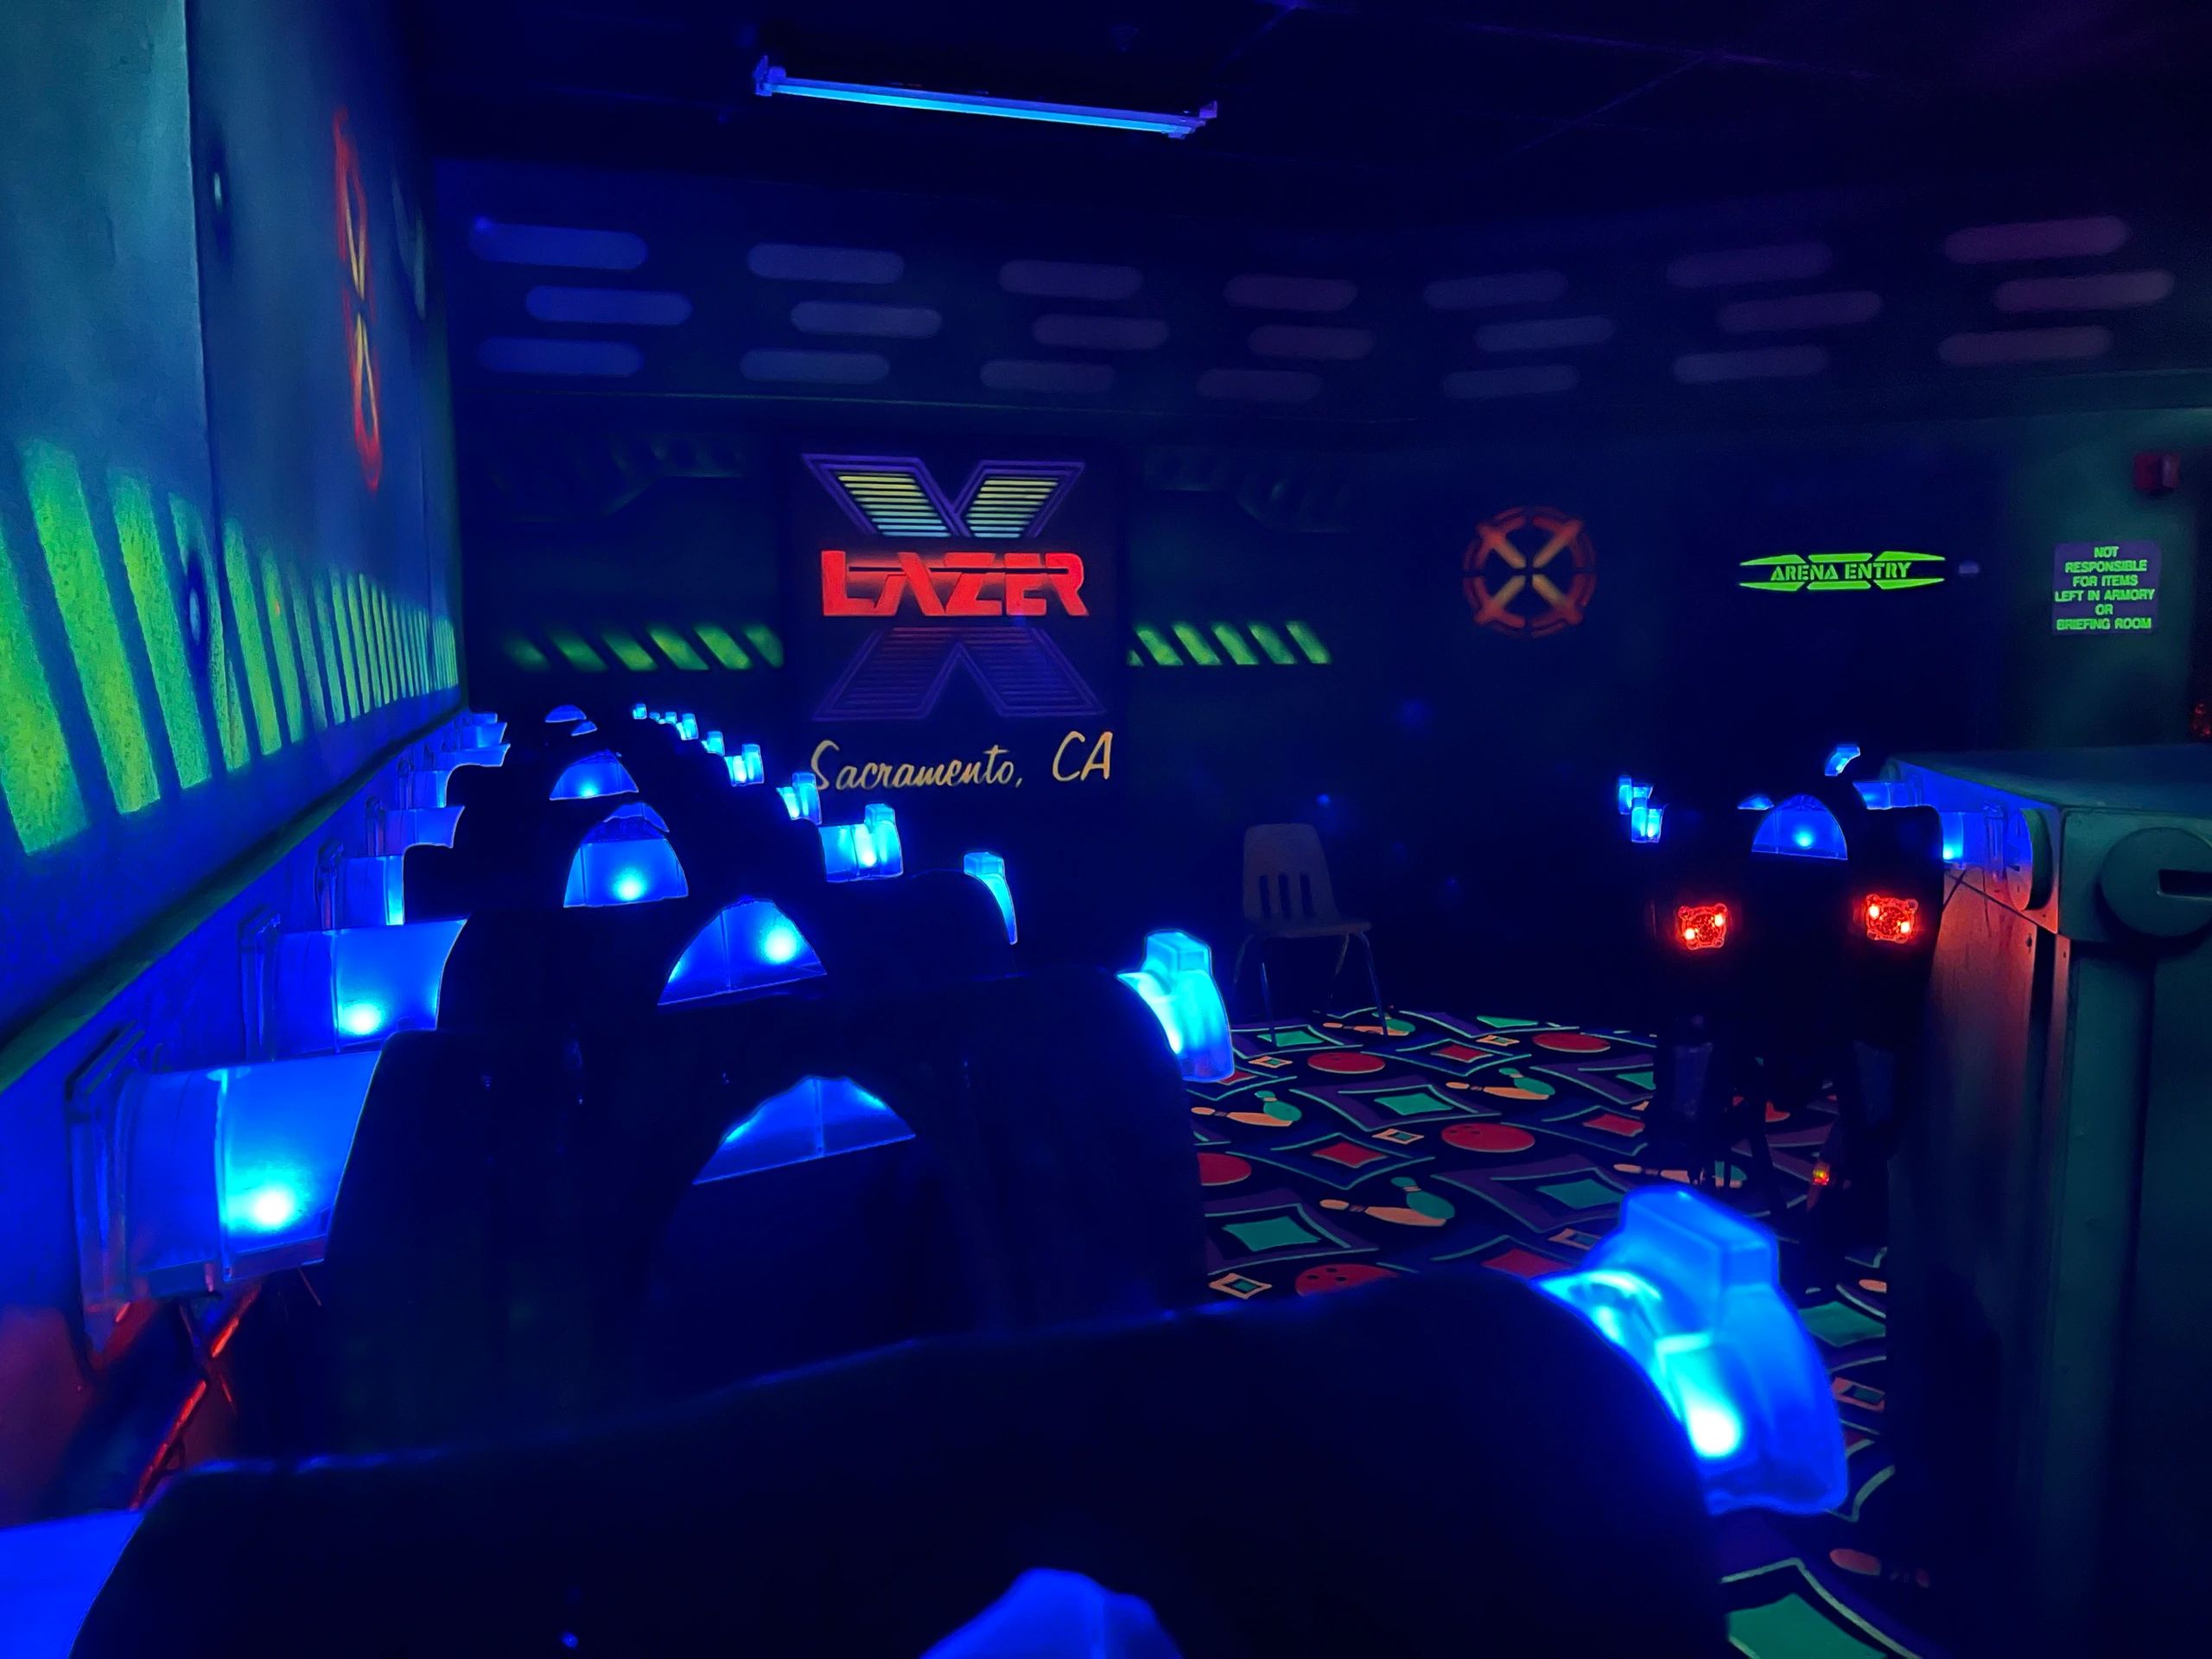 Arena laser tag game rules